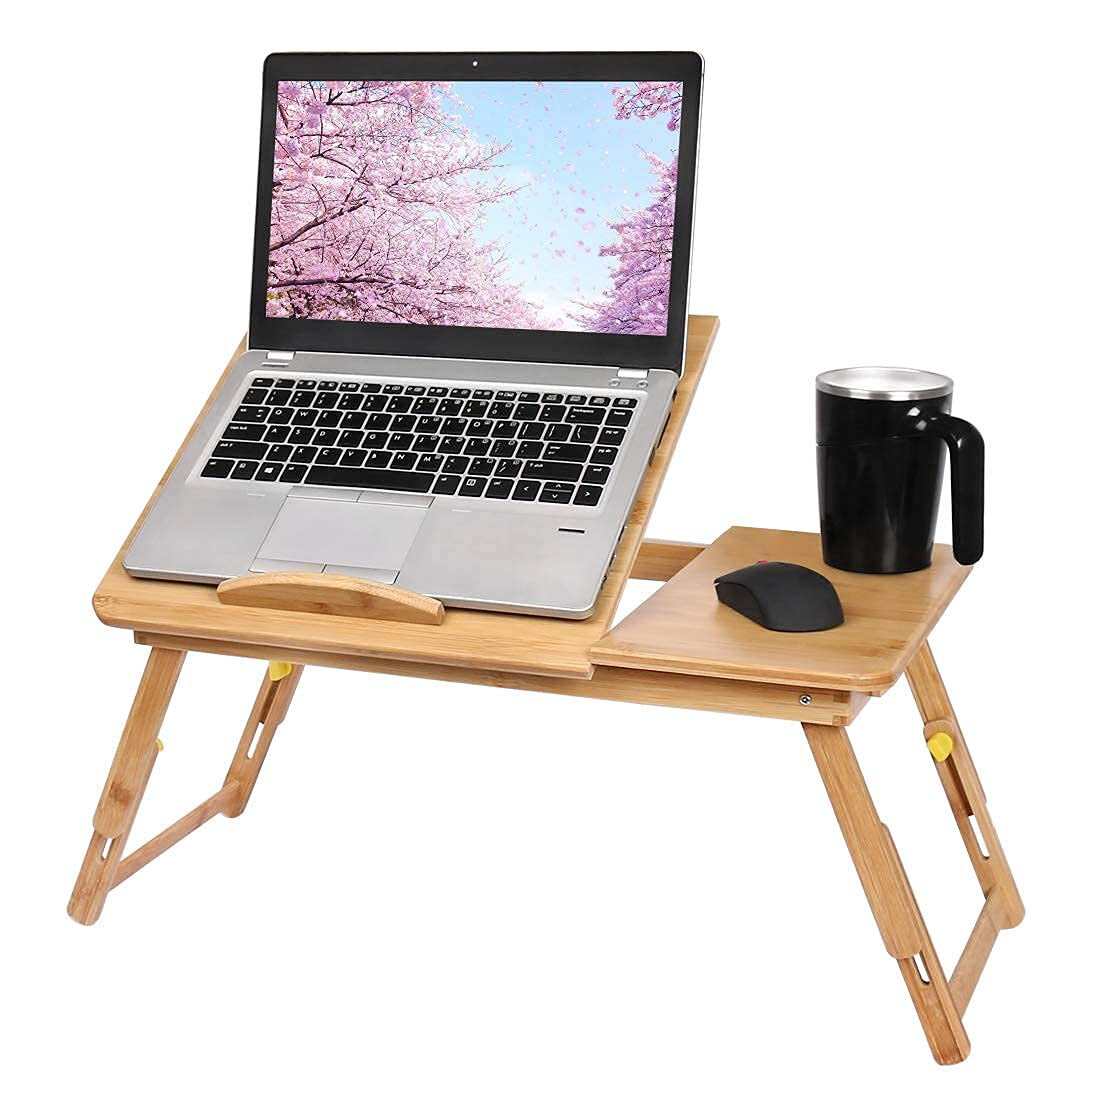 Laptop Desk,Bamboo Adjustable Lap Desks Table Floor Table for Laptop Writing,Eating Foldable Bed Desk with Drawer Breakfast Serving Tray Table